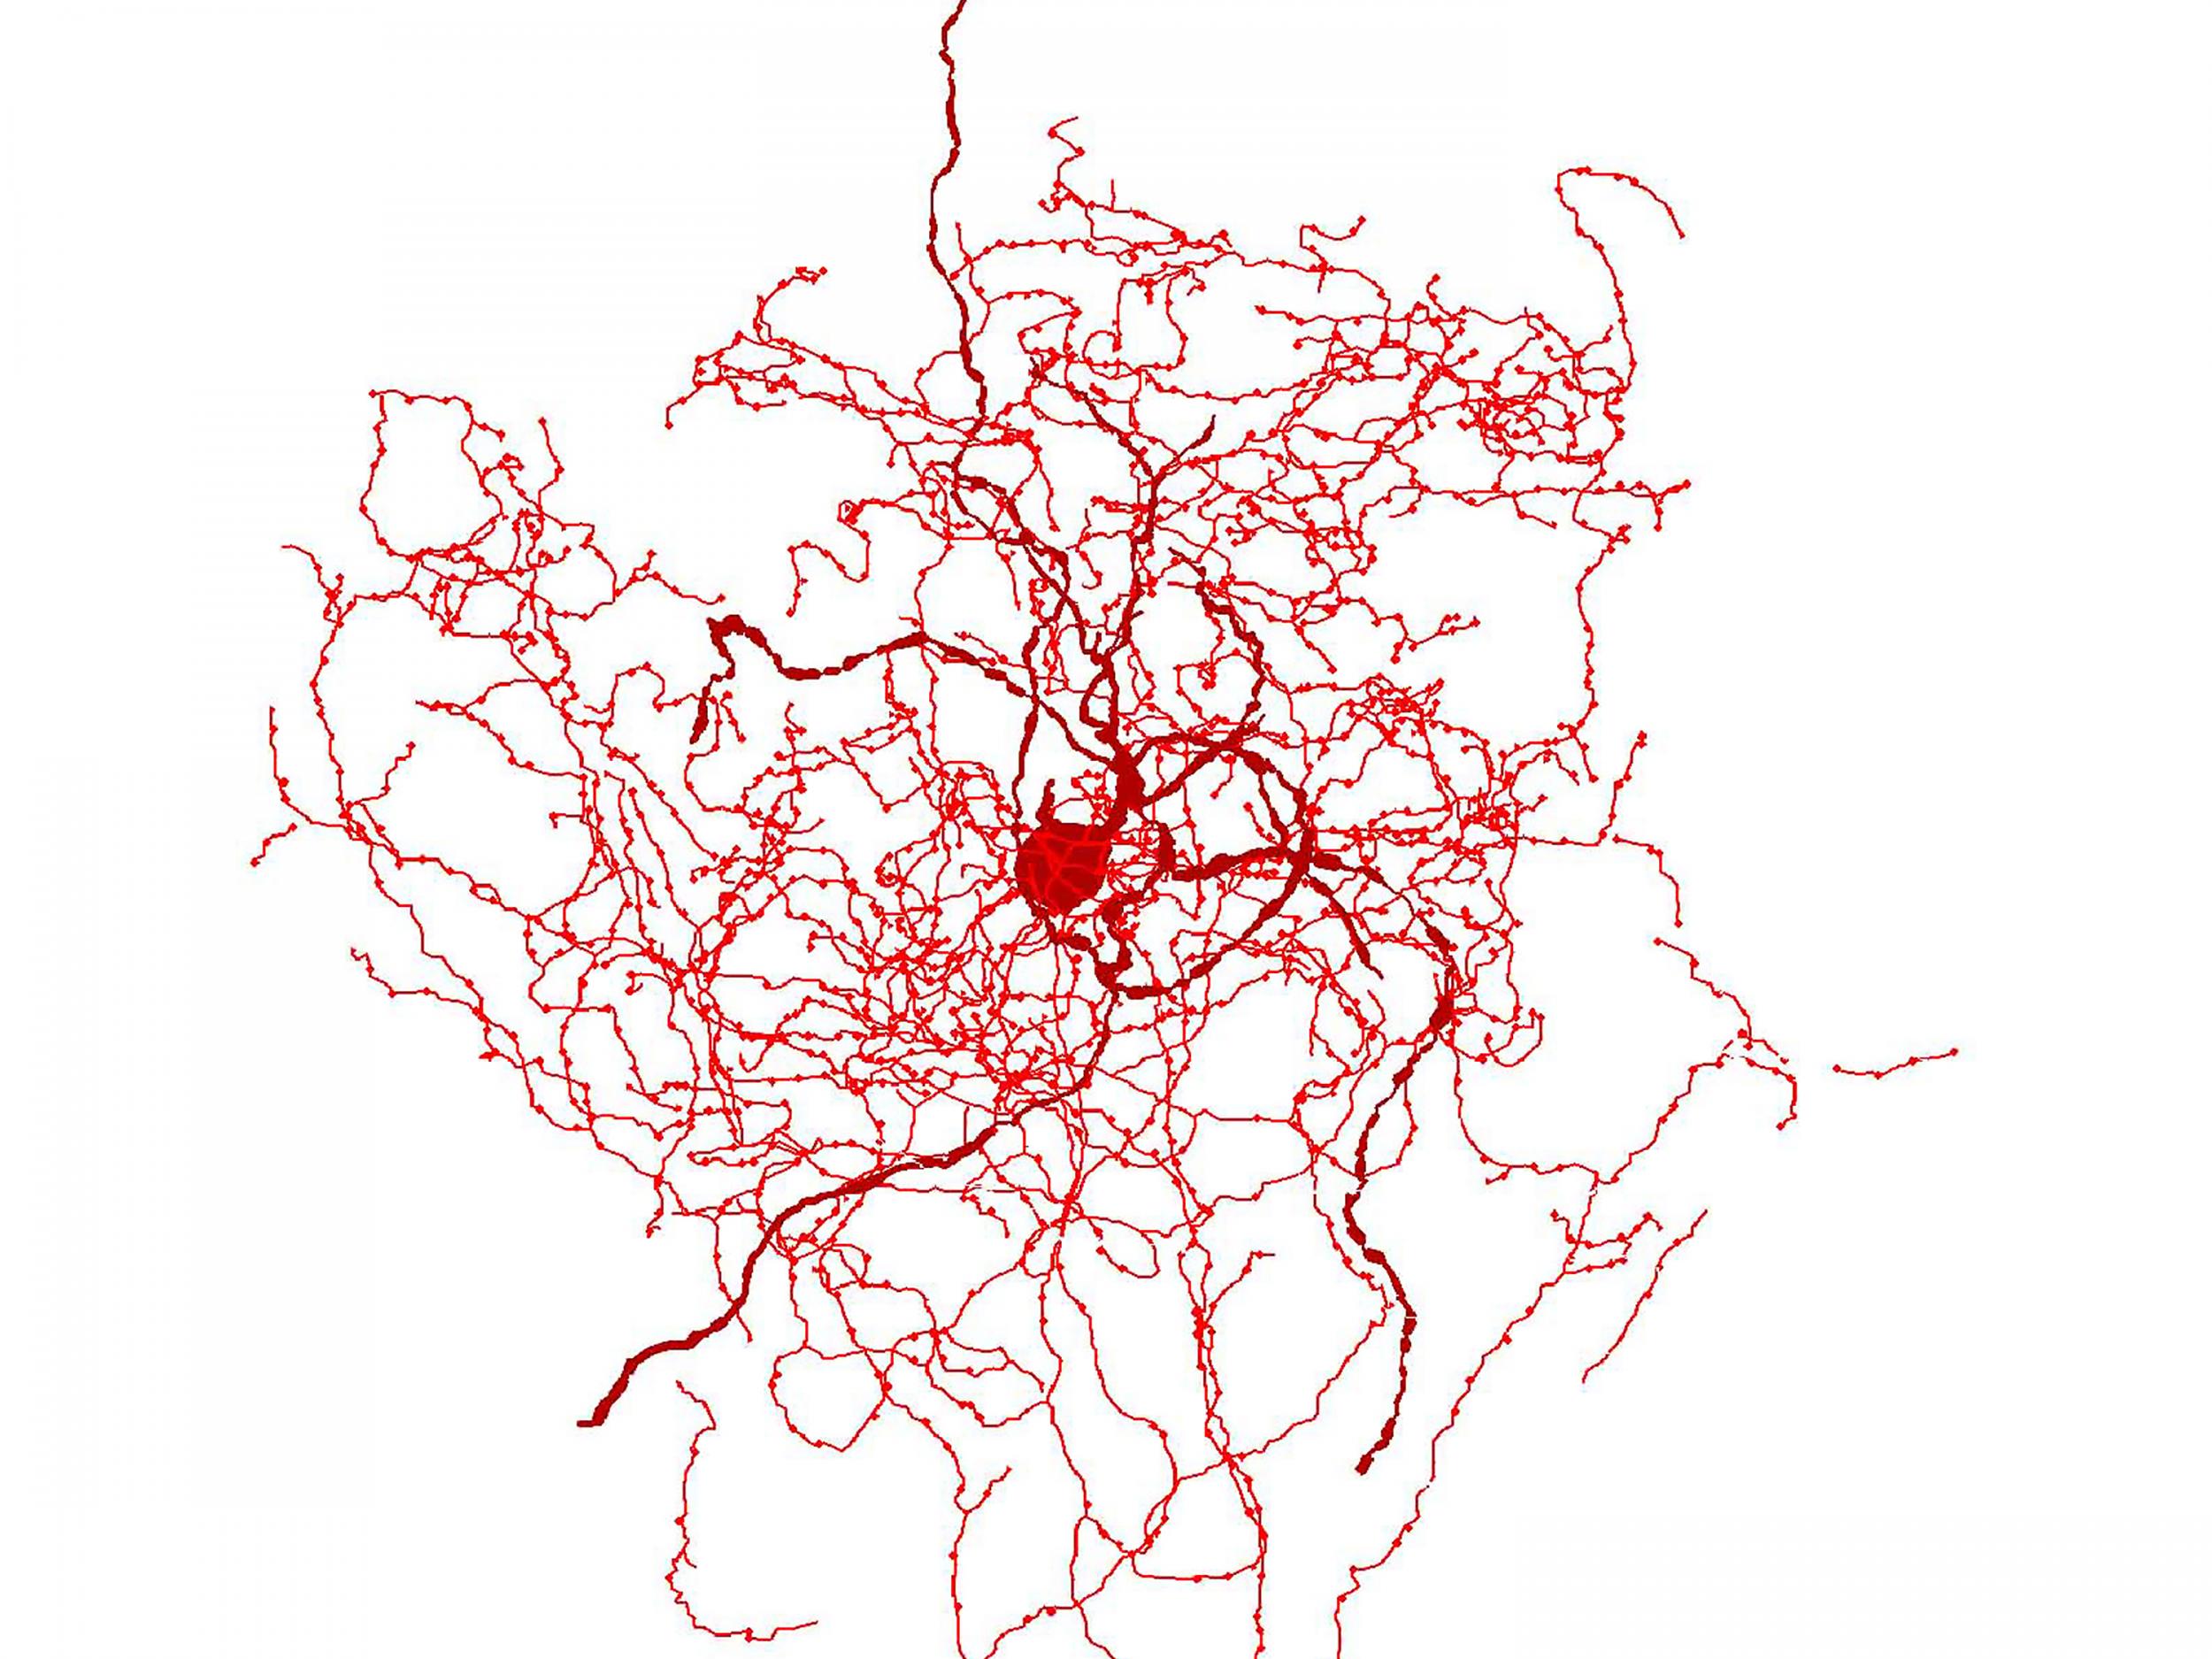 Digital reconstruction of a rosehip neuron in the human brain showing bundle of nerve fibres around central cell body